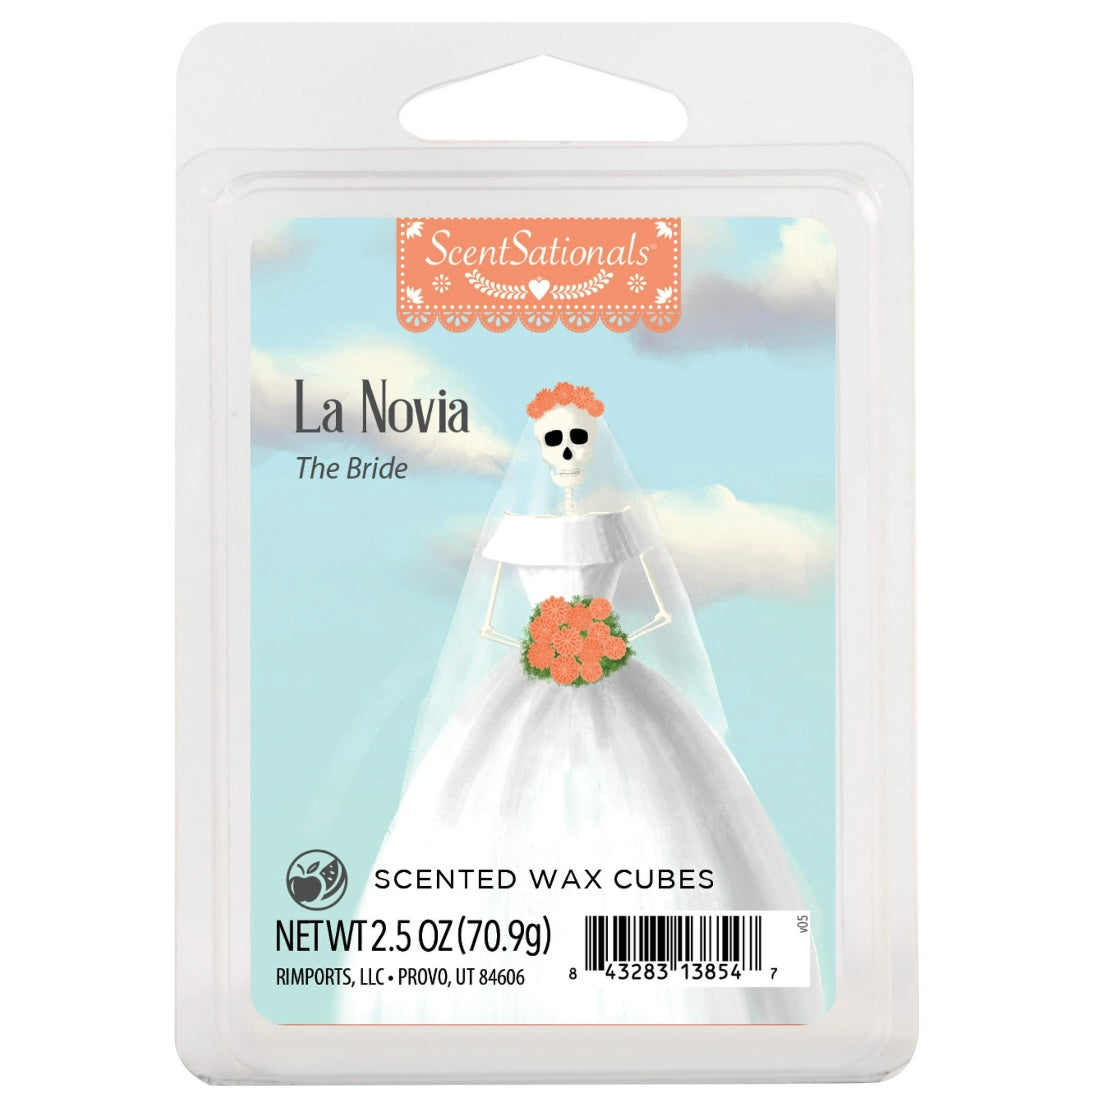 ScentSationals Scented Wax Melts (Halloween Edition)